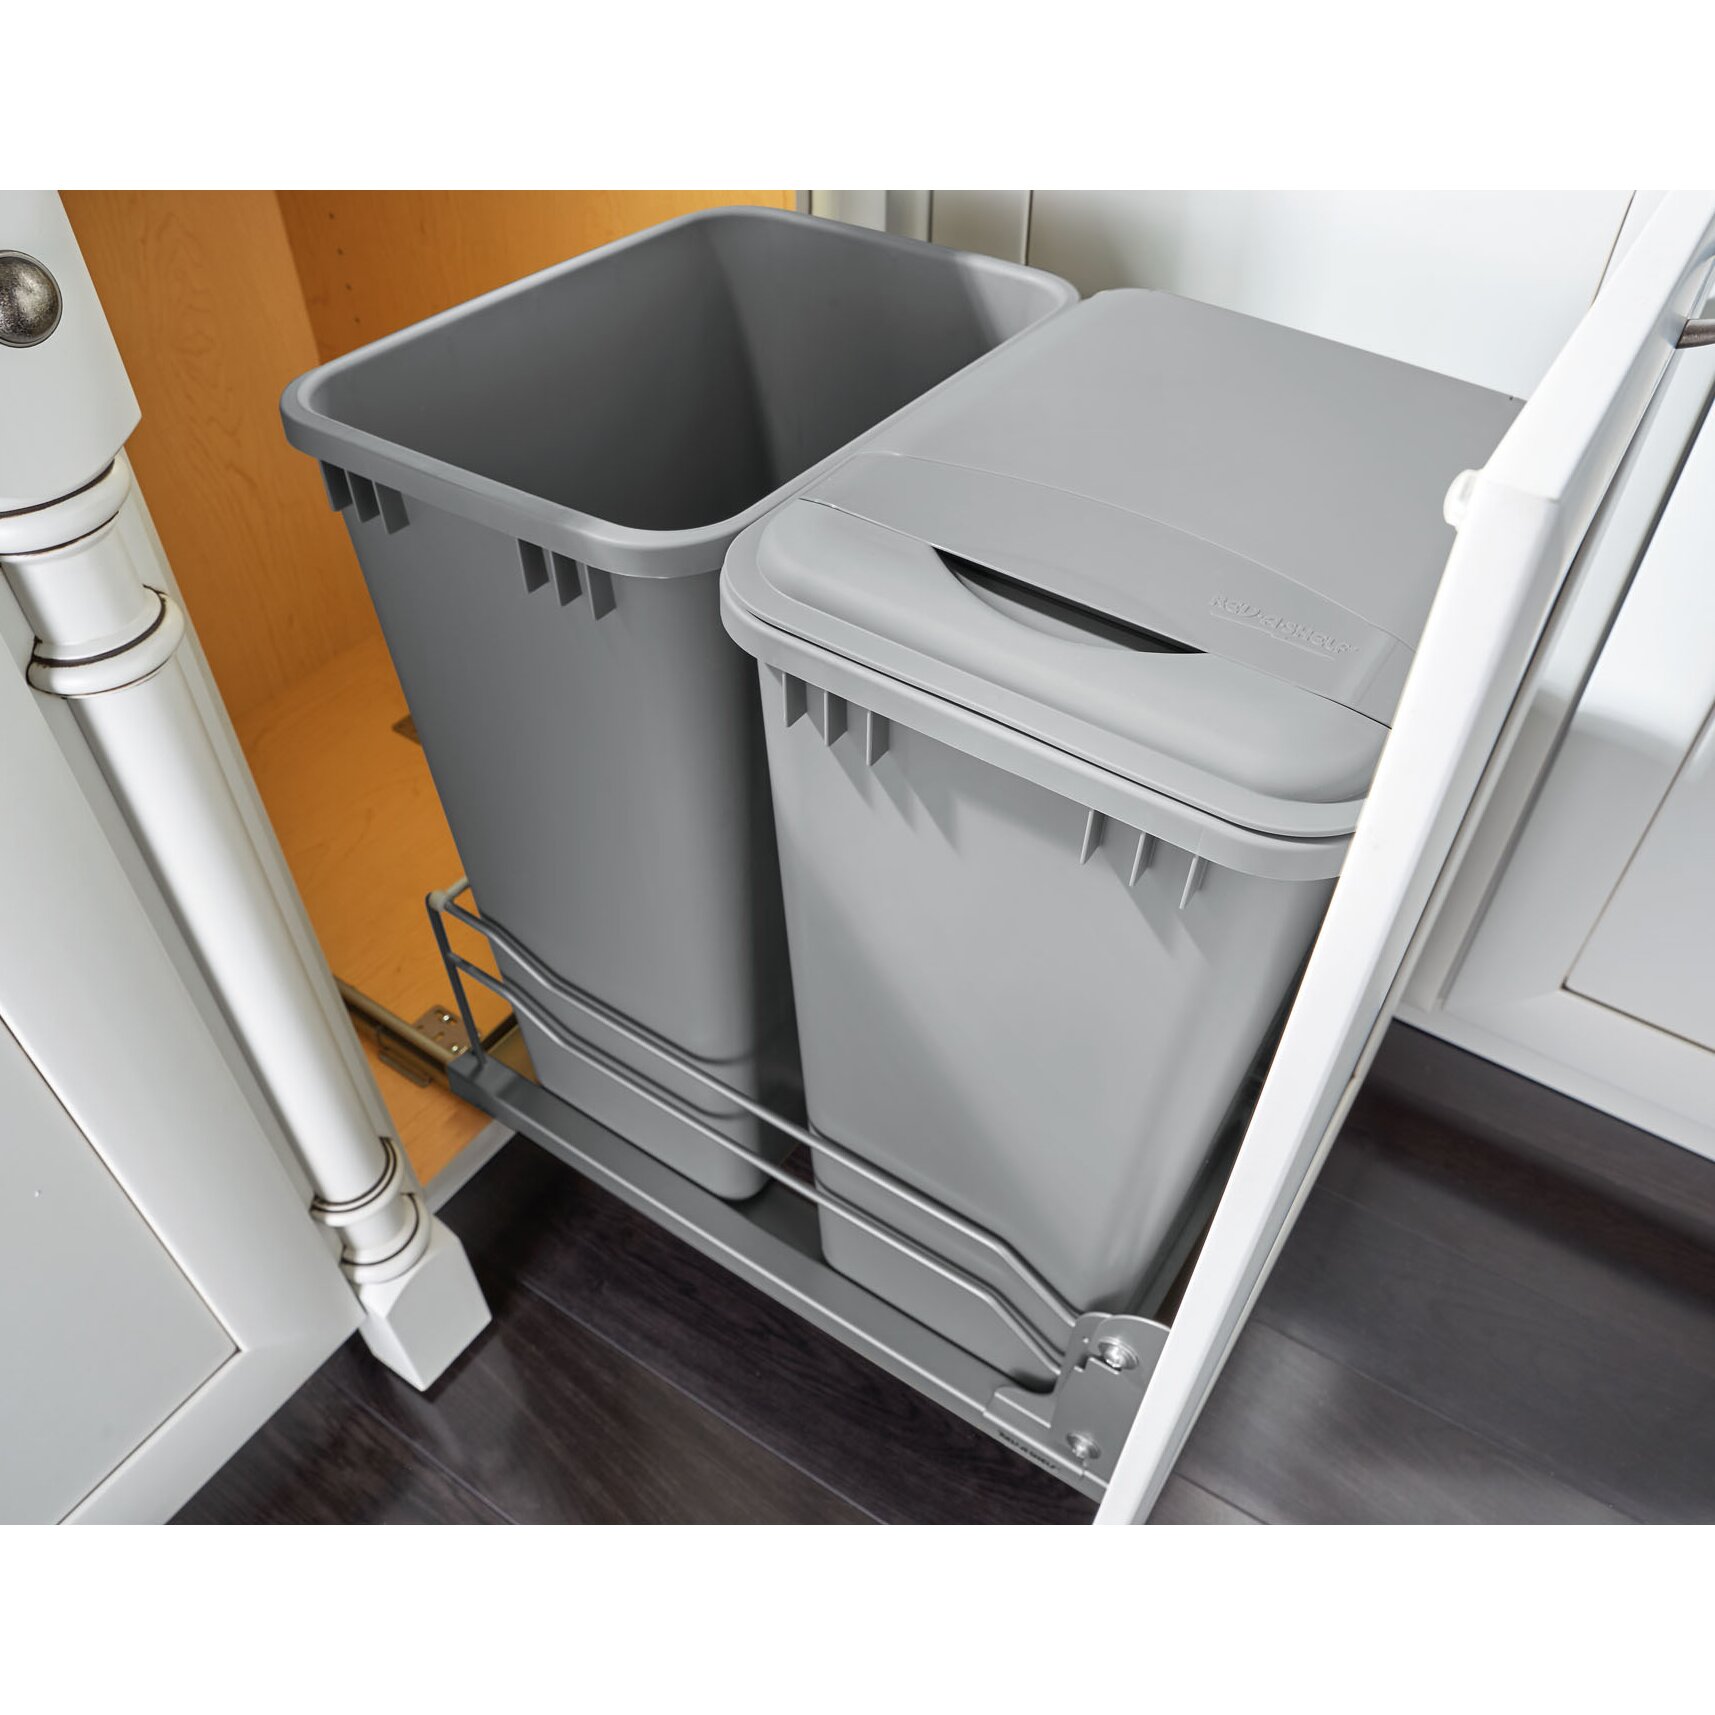 Rev-A-Shelf 12.5 Gallon Pull-Out Waste Container | Wayfair